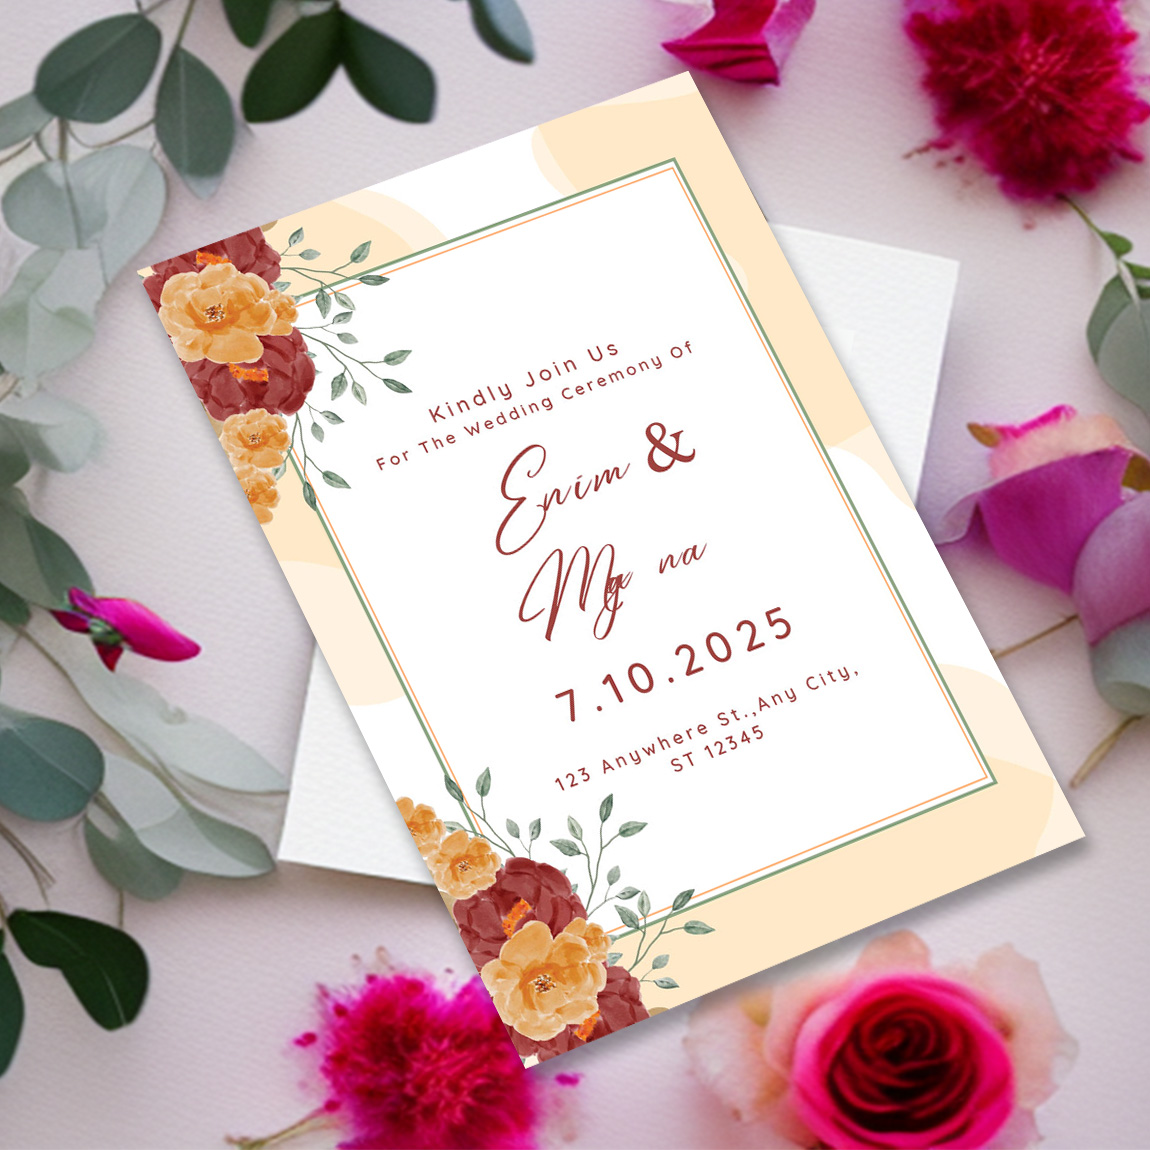 Image of colorful wedding invitation in pastel colors with flowers.